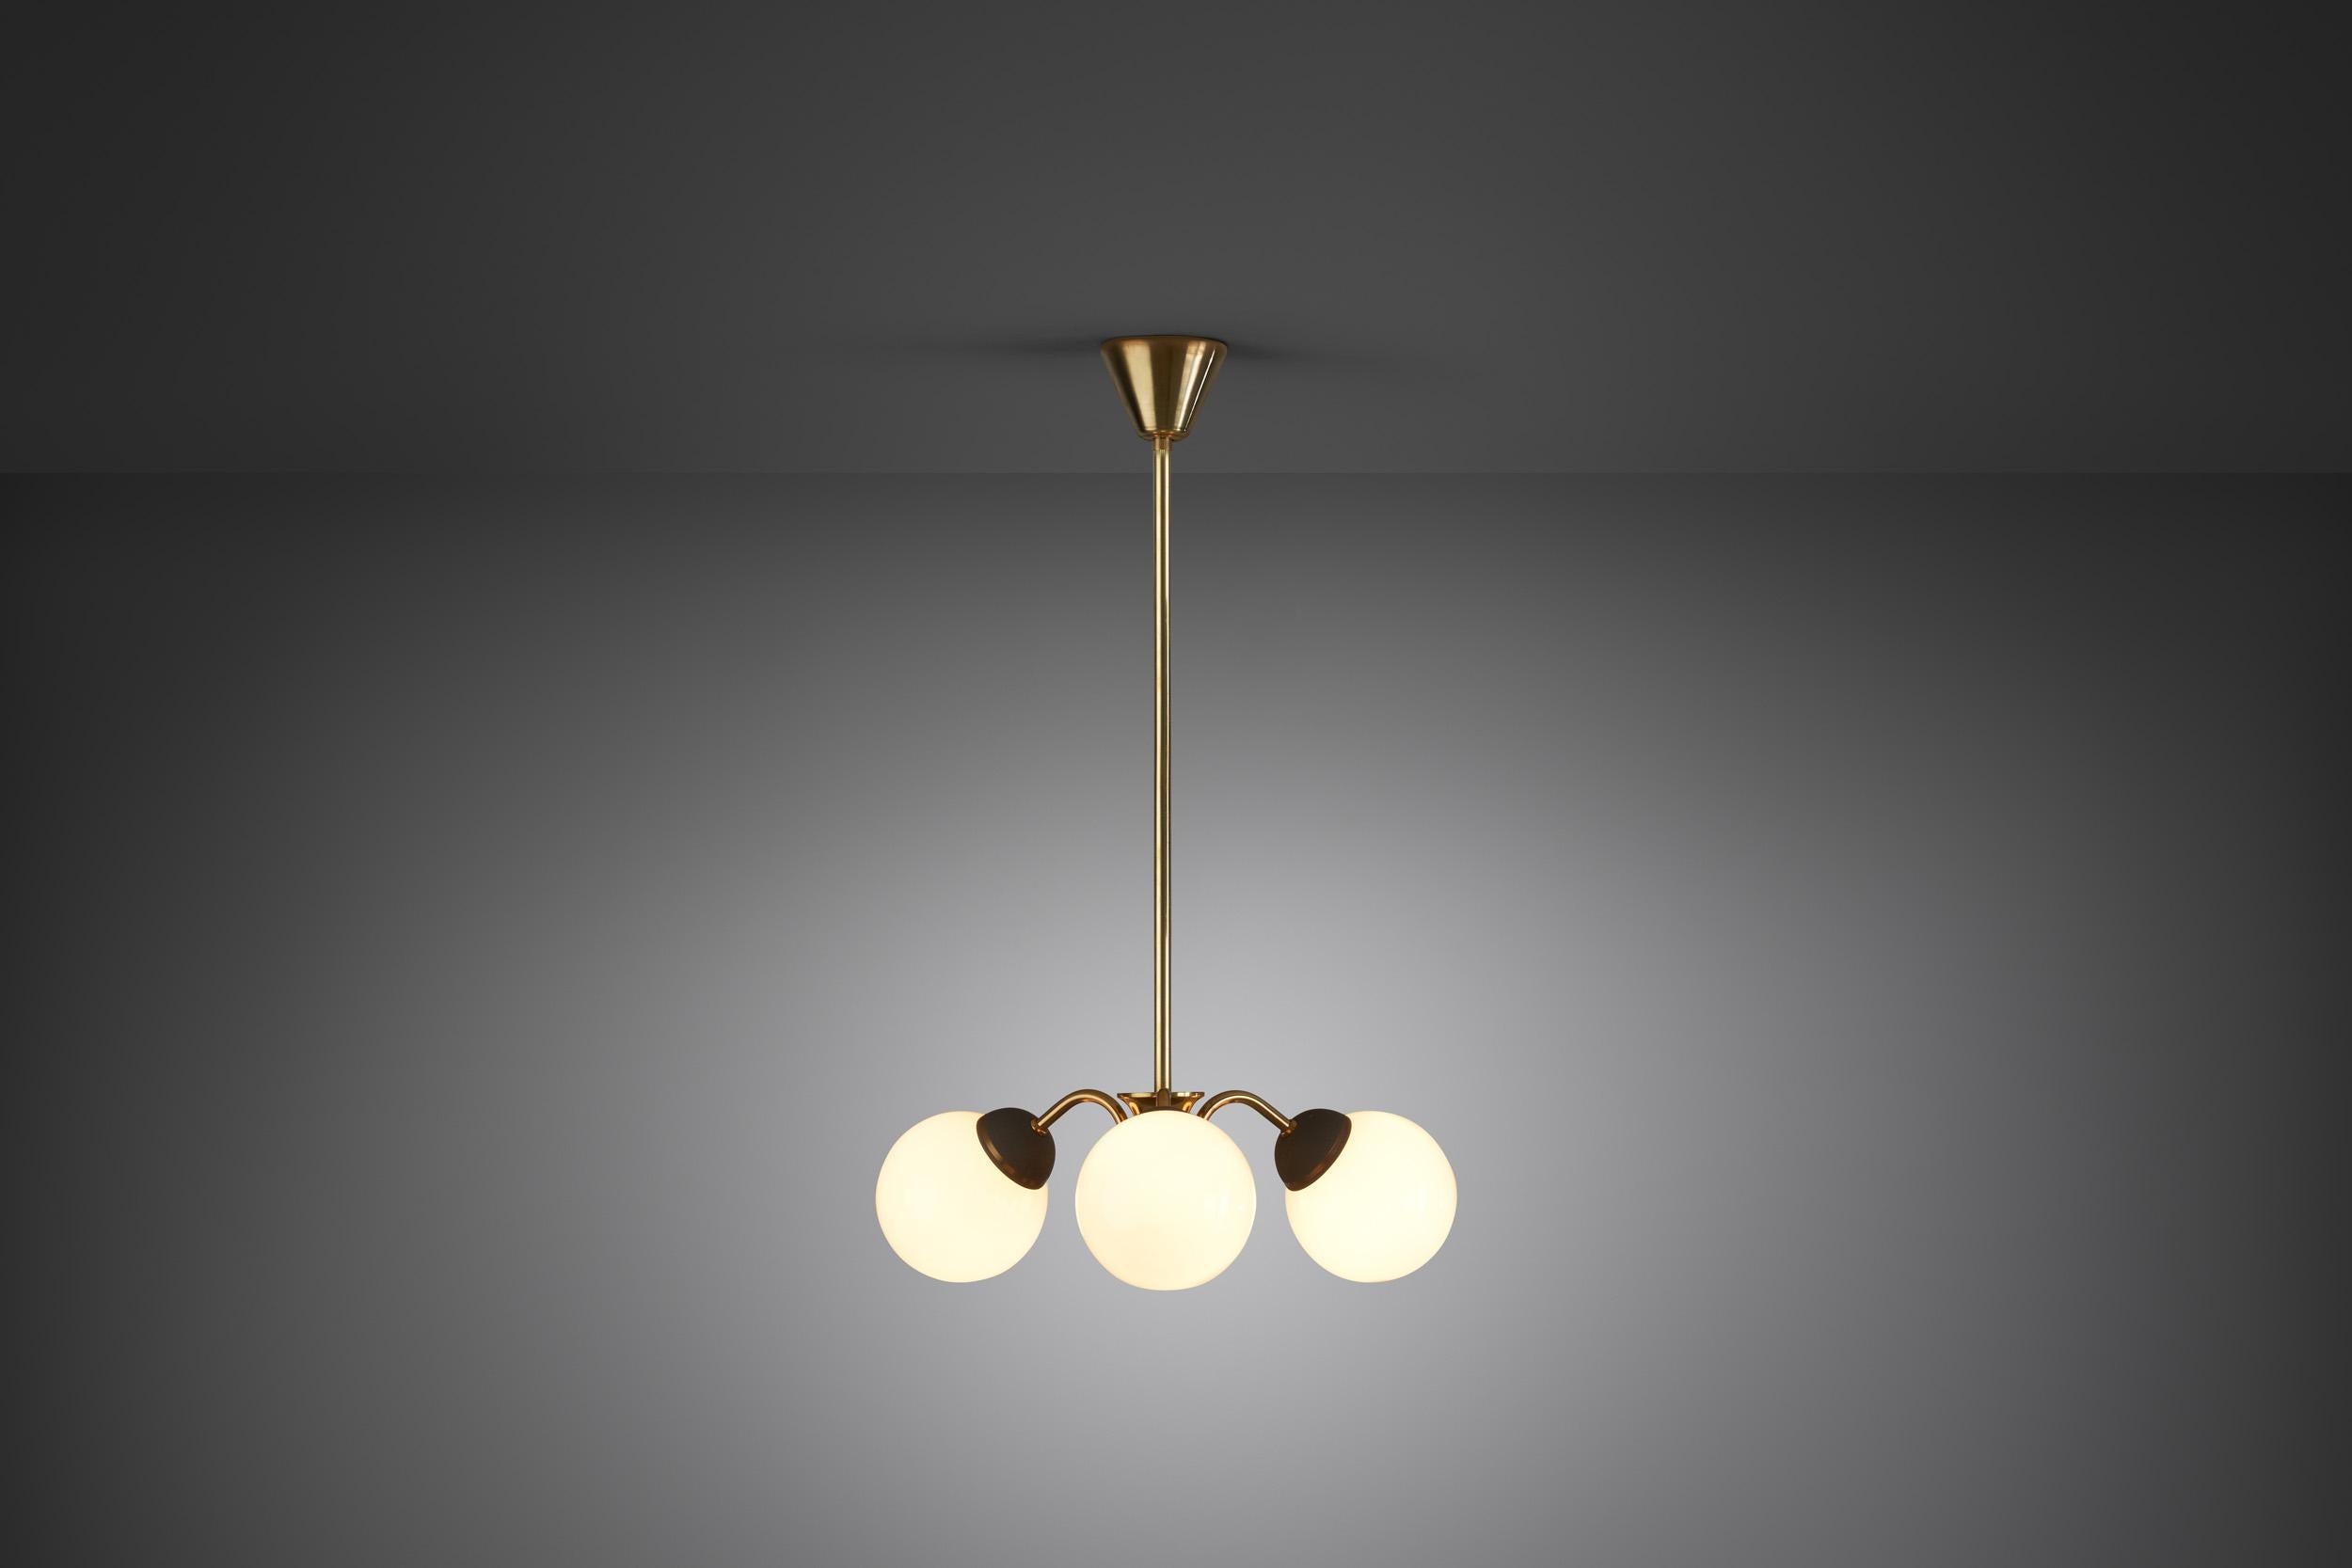 Scandinavian Brass Three-Armed Ceiling Lamp with Opal Glass Shades, Scandinavia 1950s For Sale